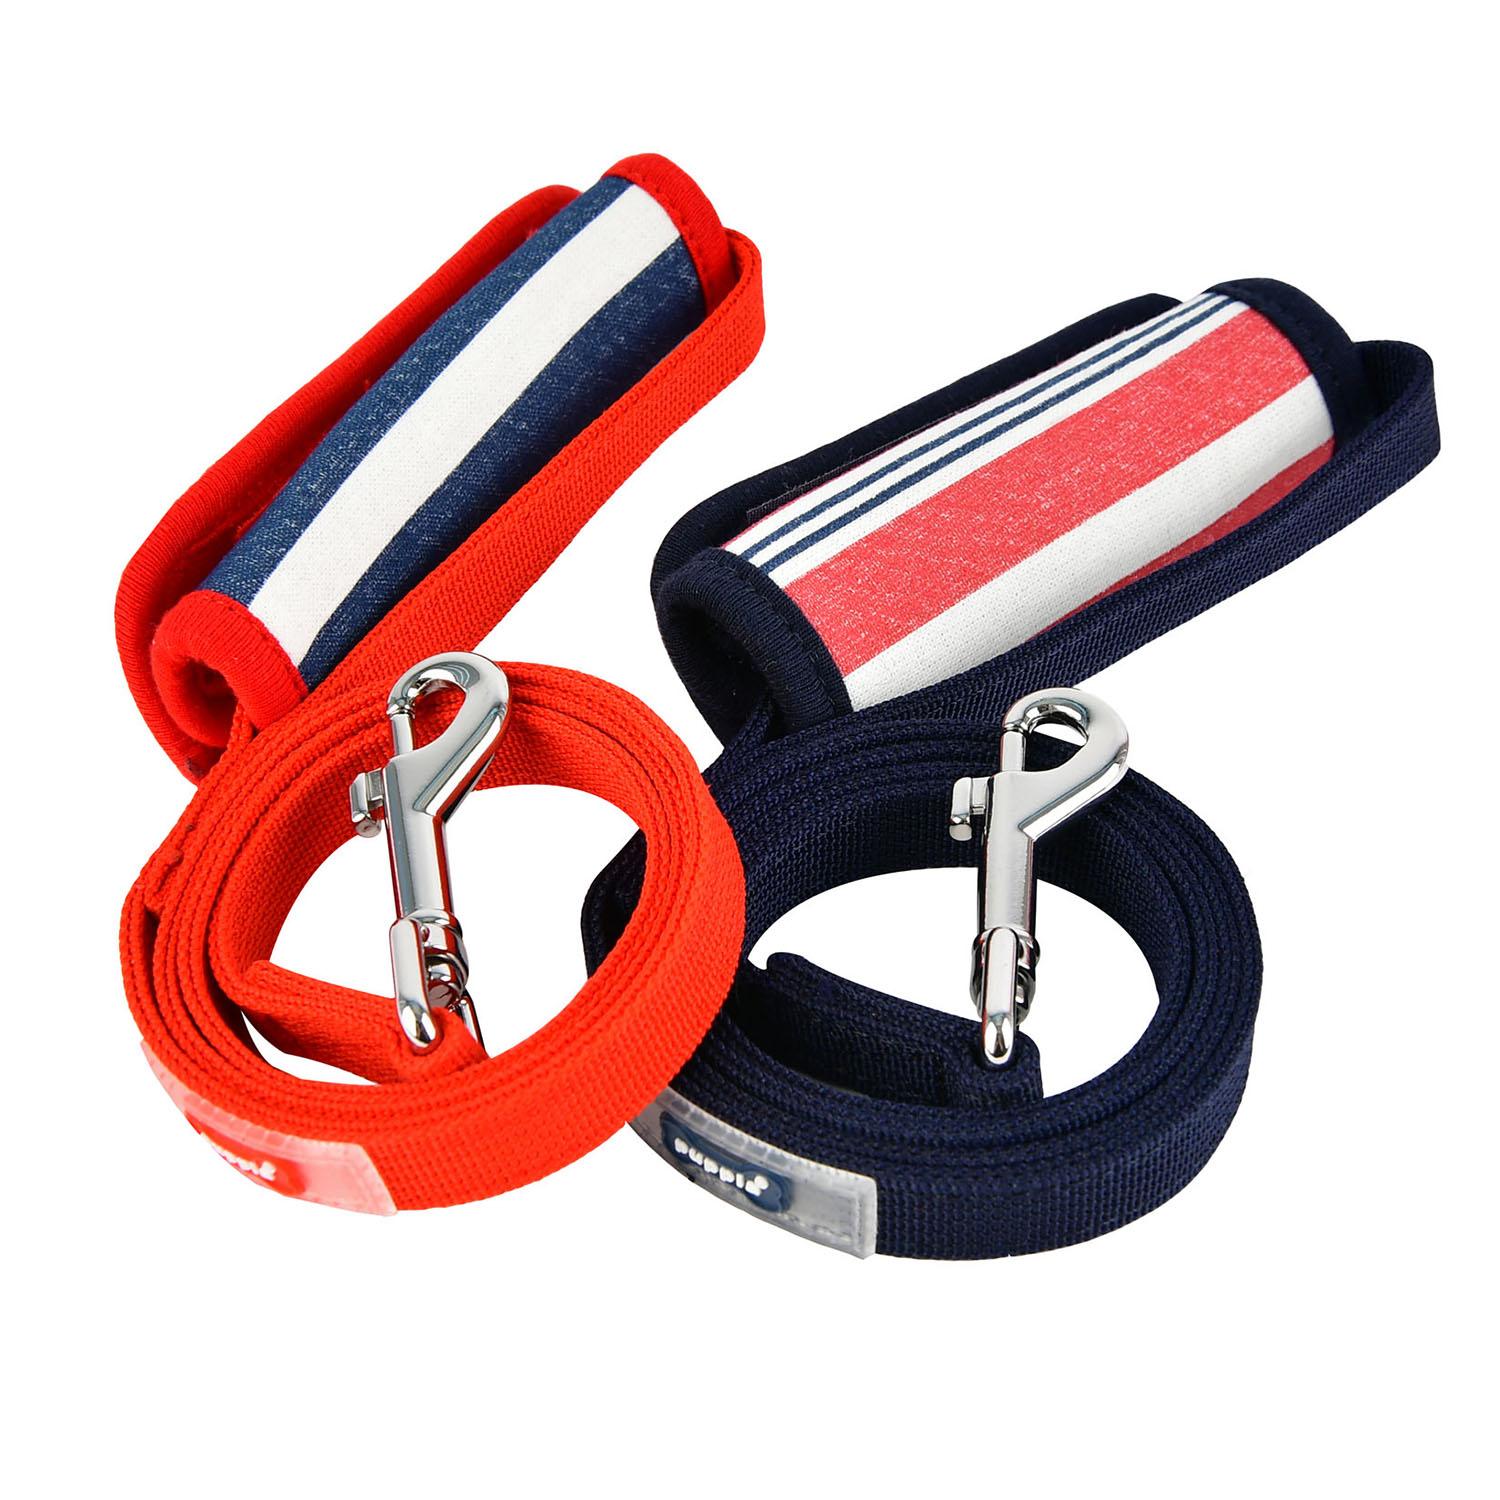 Zorion Dog Leash by Puppia